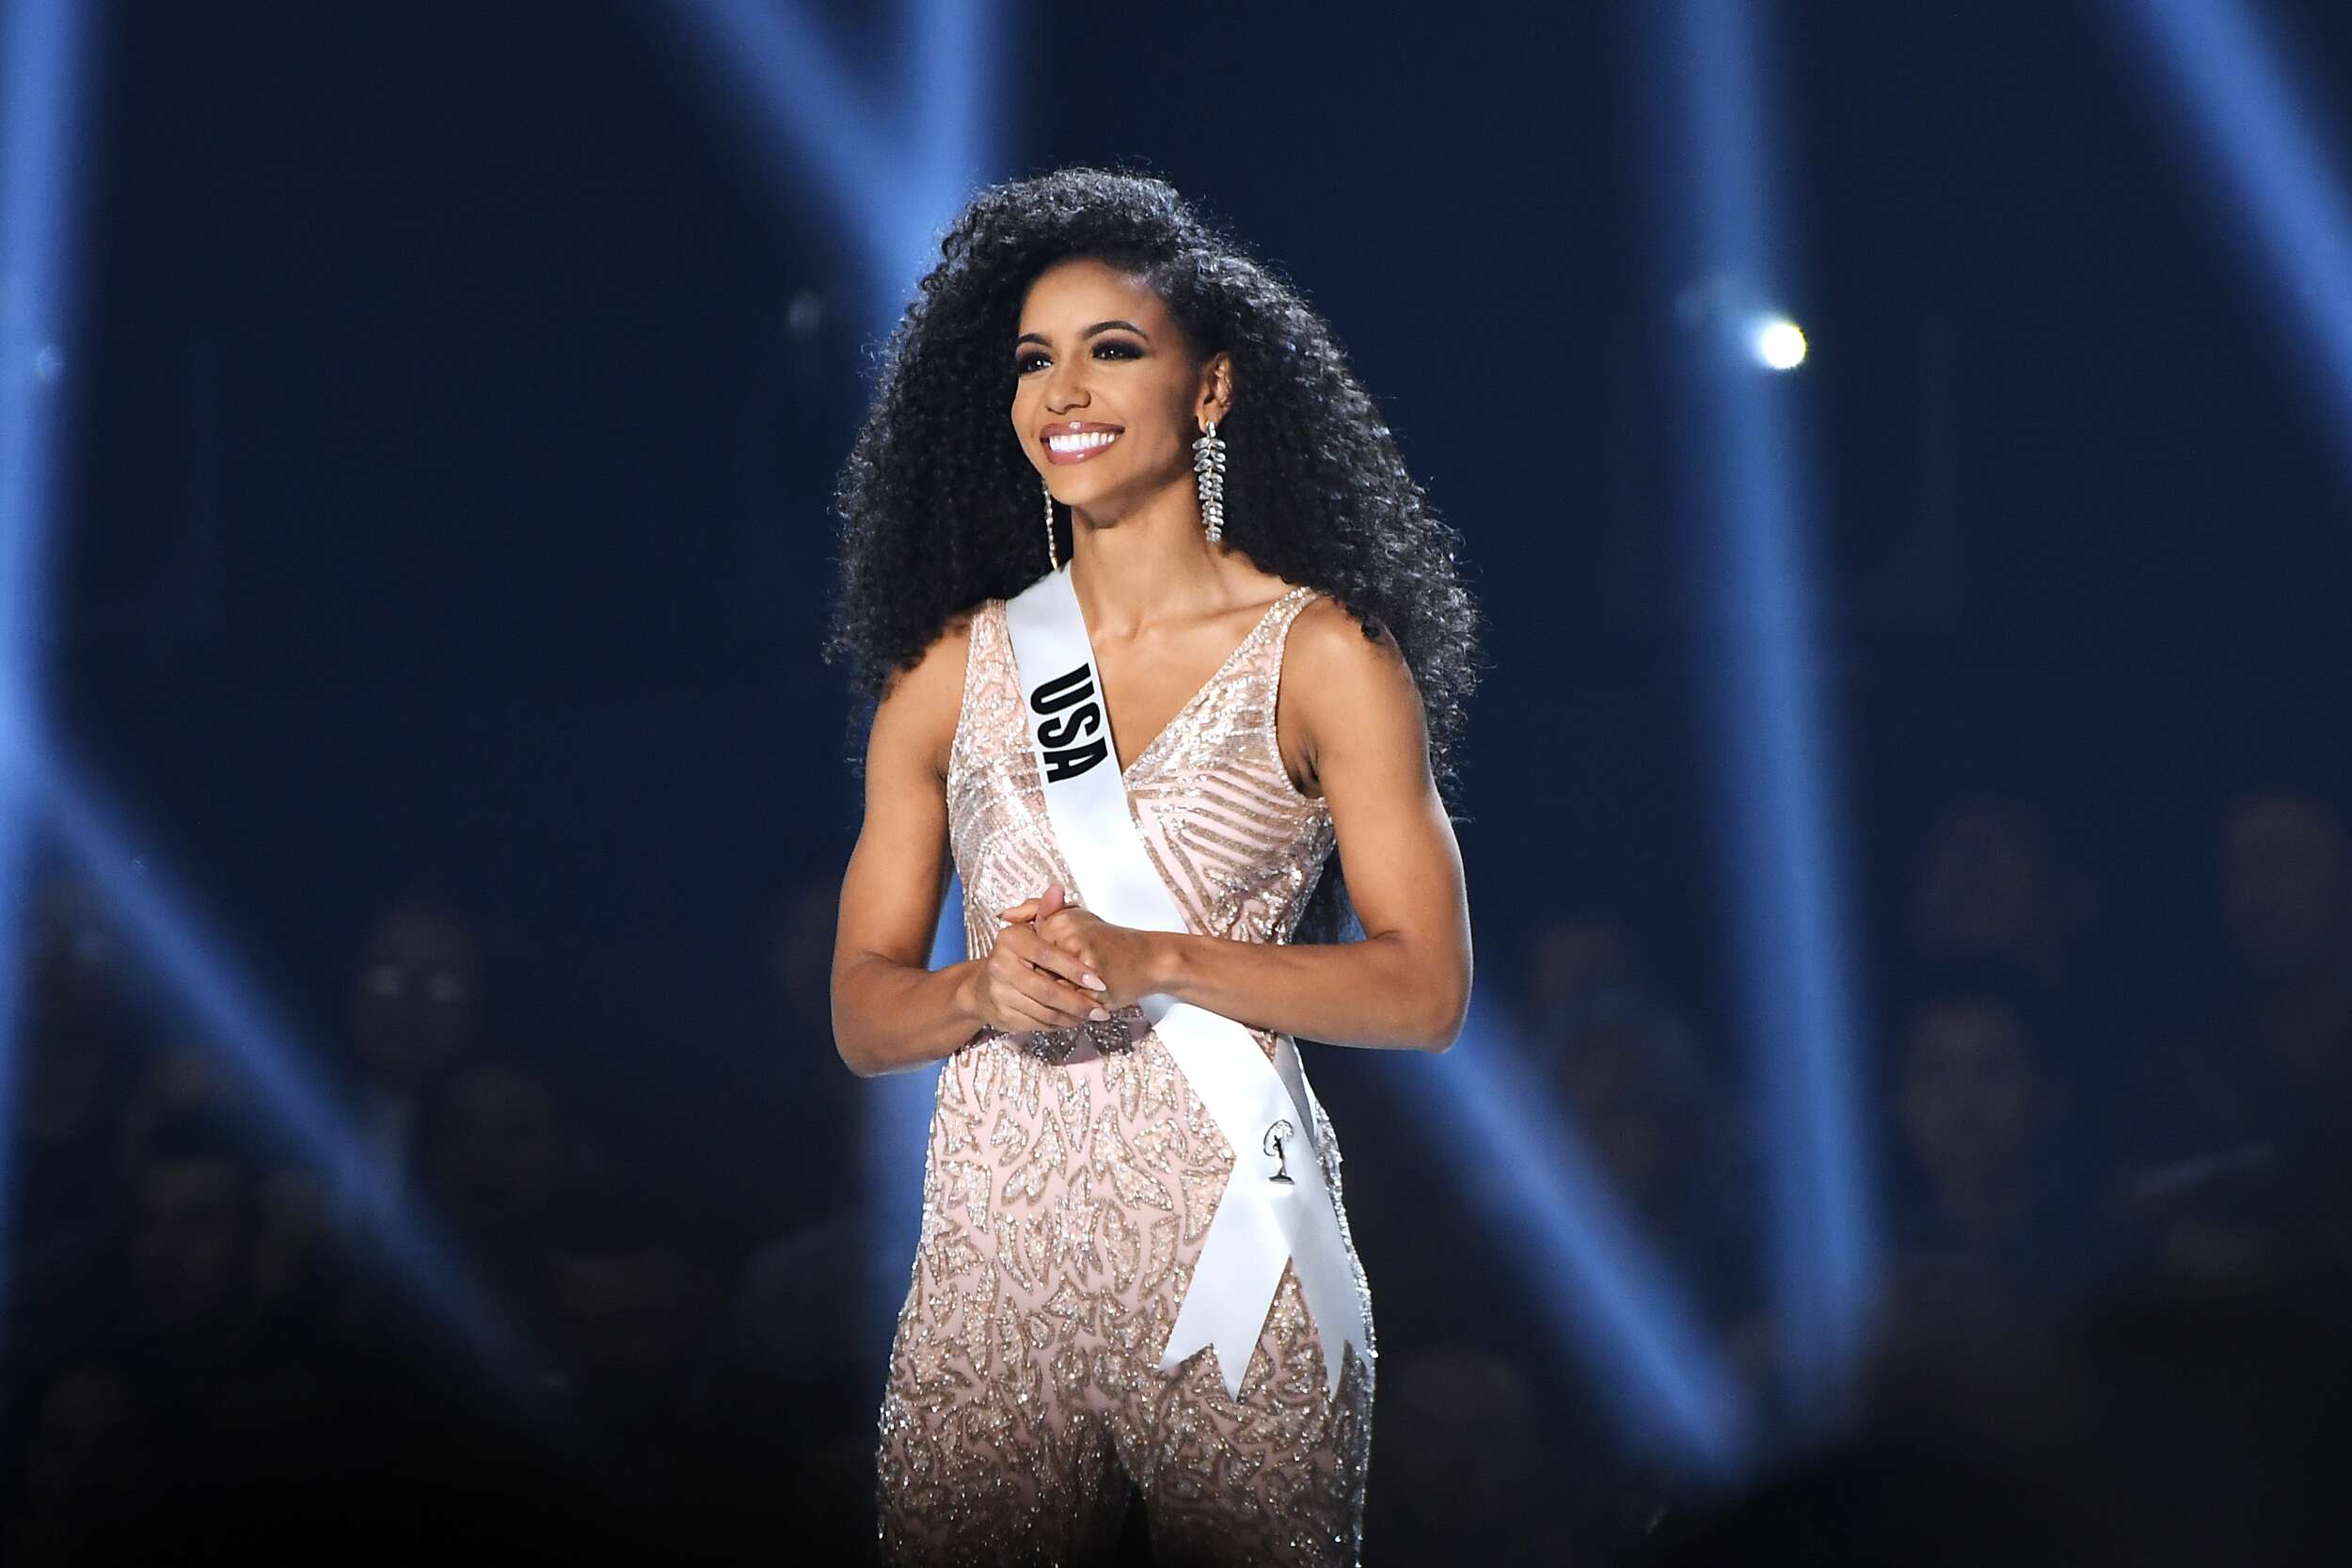 Mother of Miss USA 2019 said she was suffering from ‘high-functioning depression‘